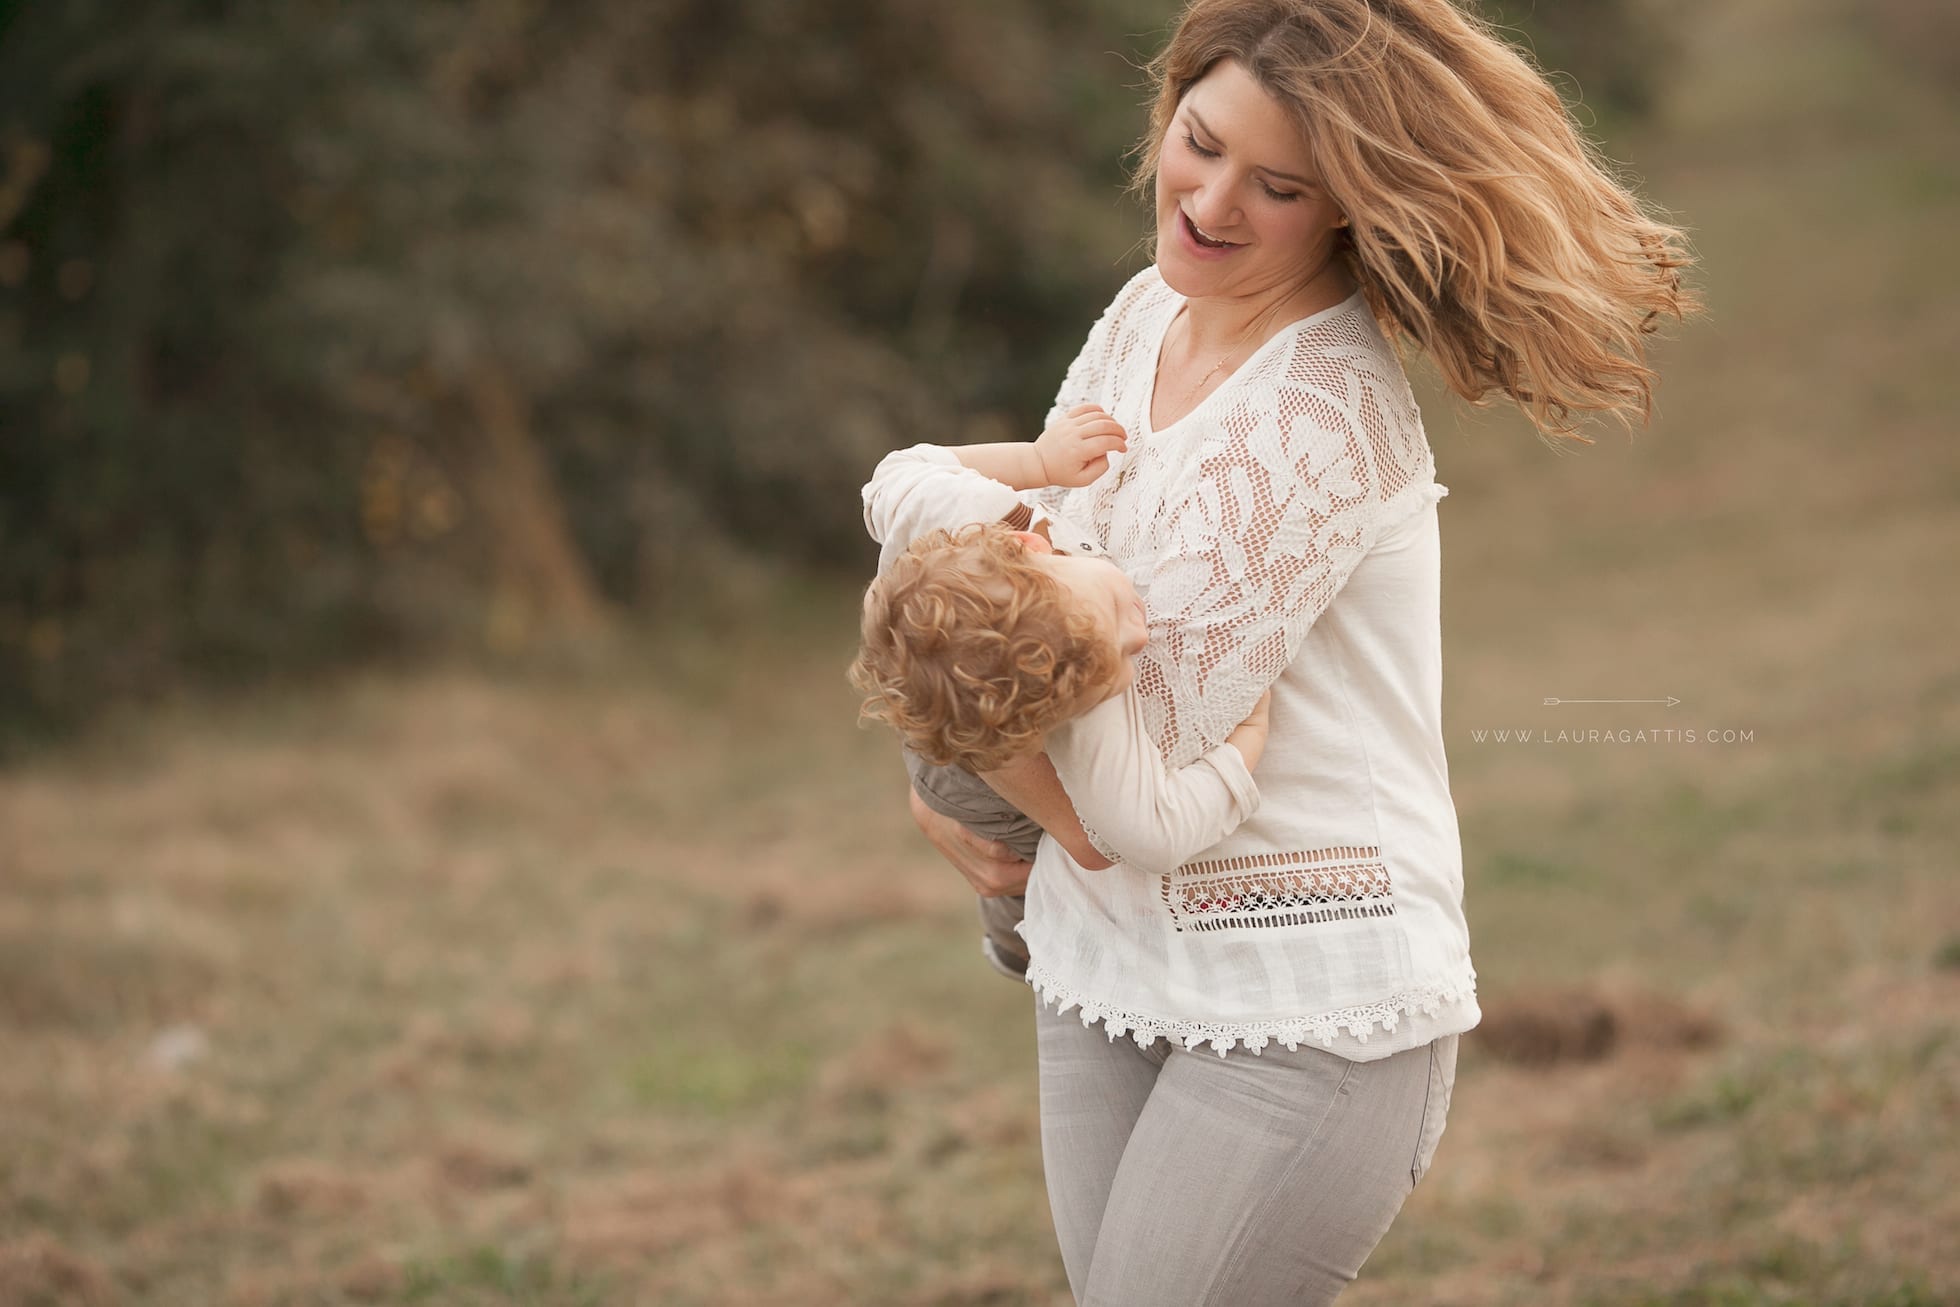 mother and son at play | laura gattis photography